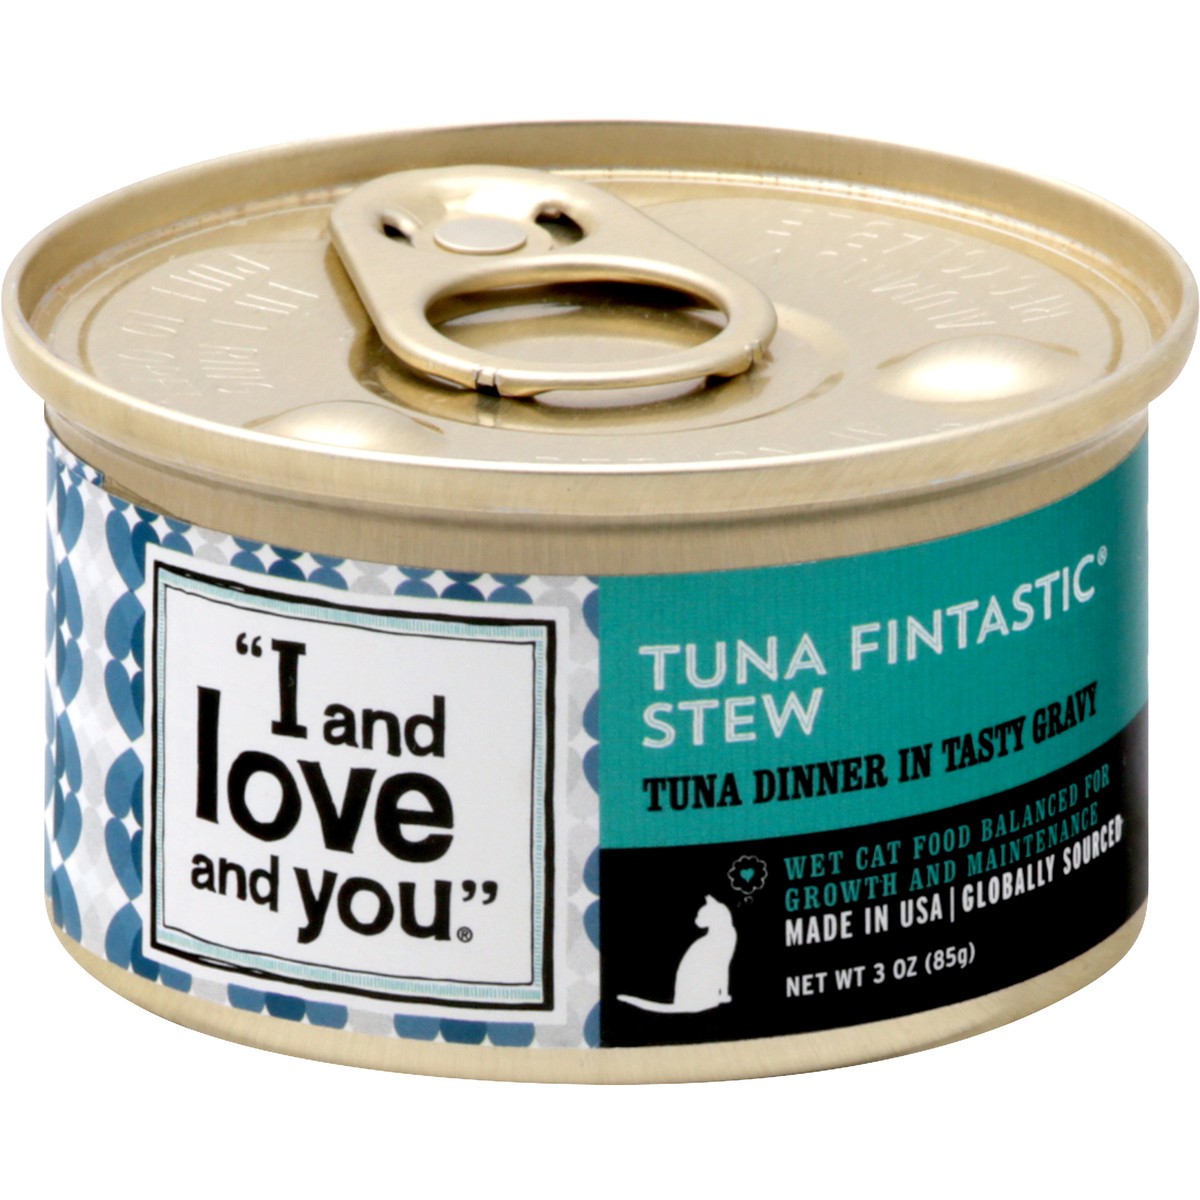 slide 1 of 1, I and Love and You Tuna Fintastic Stew Wet Cat Food, 3 oz